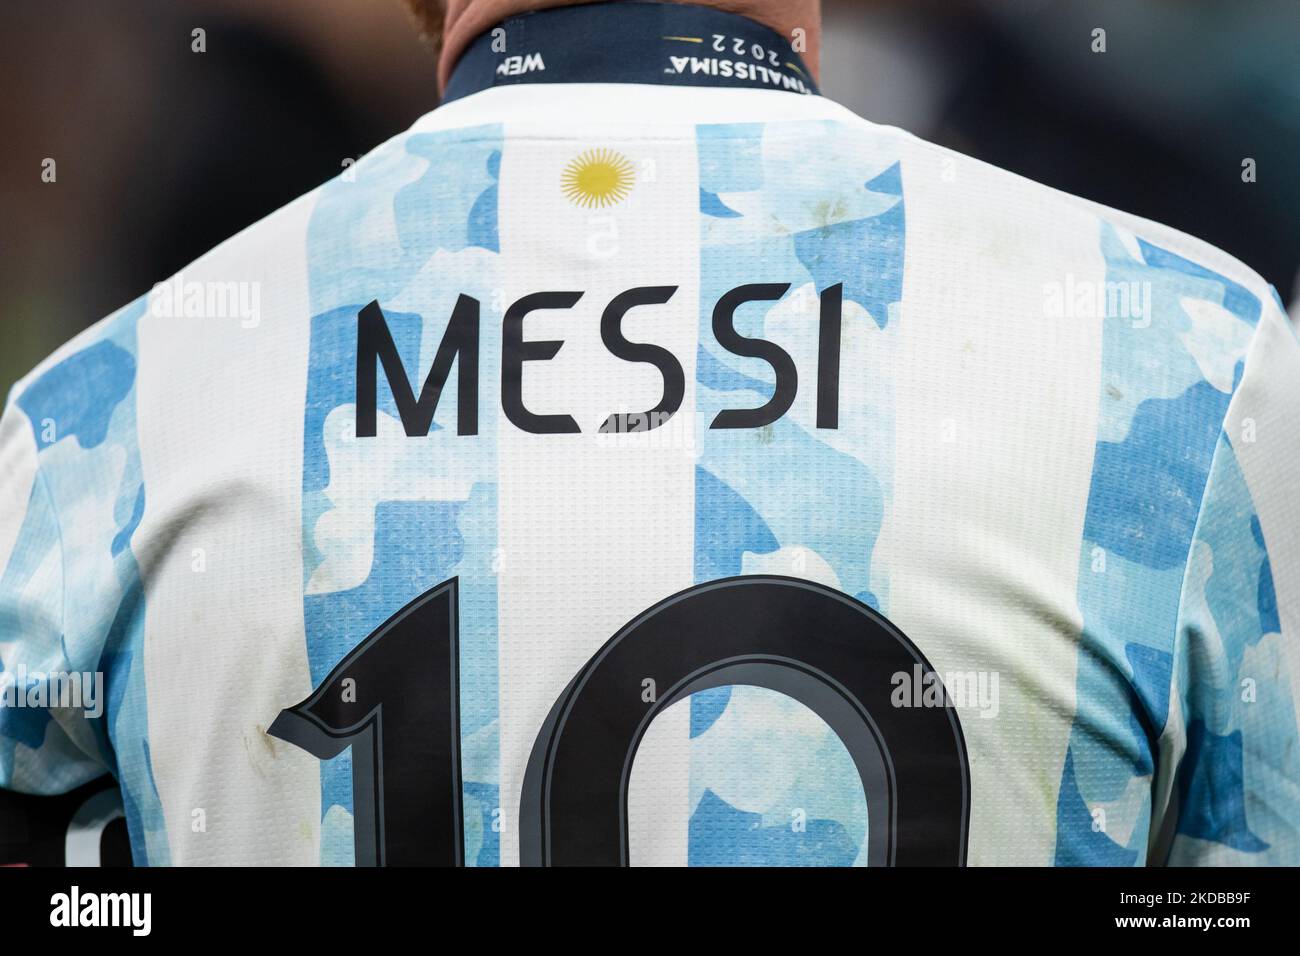 Lionel Messi of Argentina looks on during the Conmebol - UEFA Cup of Champions Finalissima between Italy and Argentina at Wembley Stadium, London on Wednesday 1st June 2022. (Photo by Federico Maranesi /MI News/NurPhoto) Stock Photo